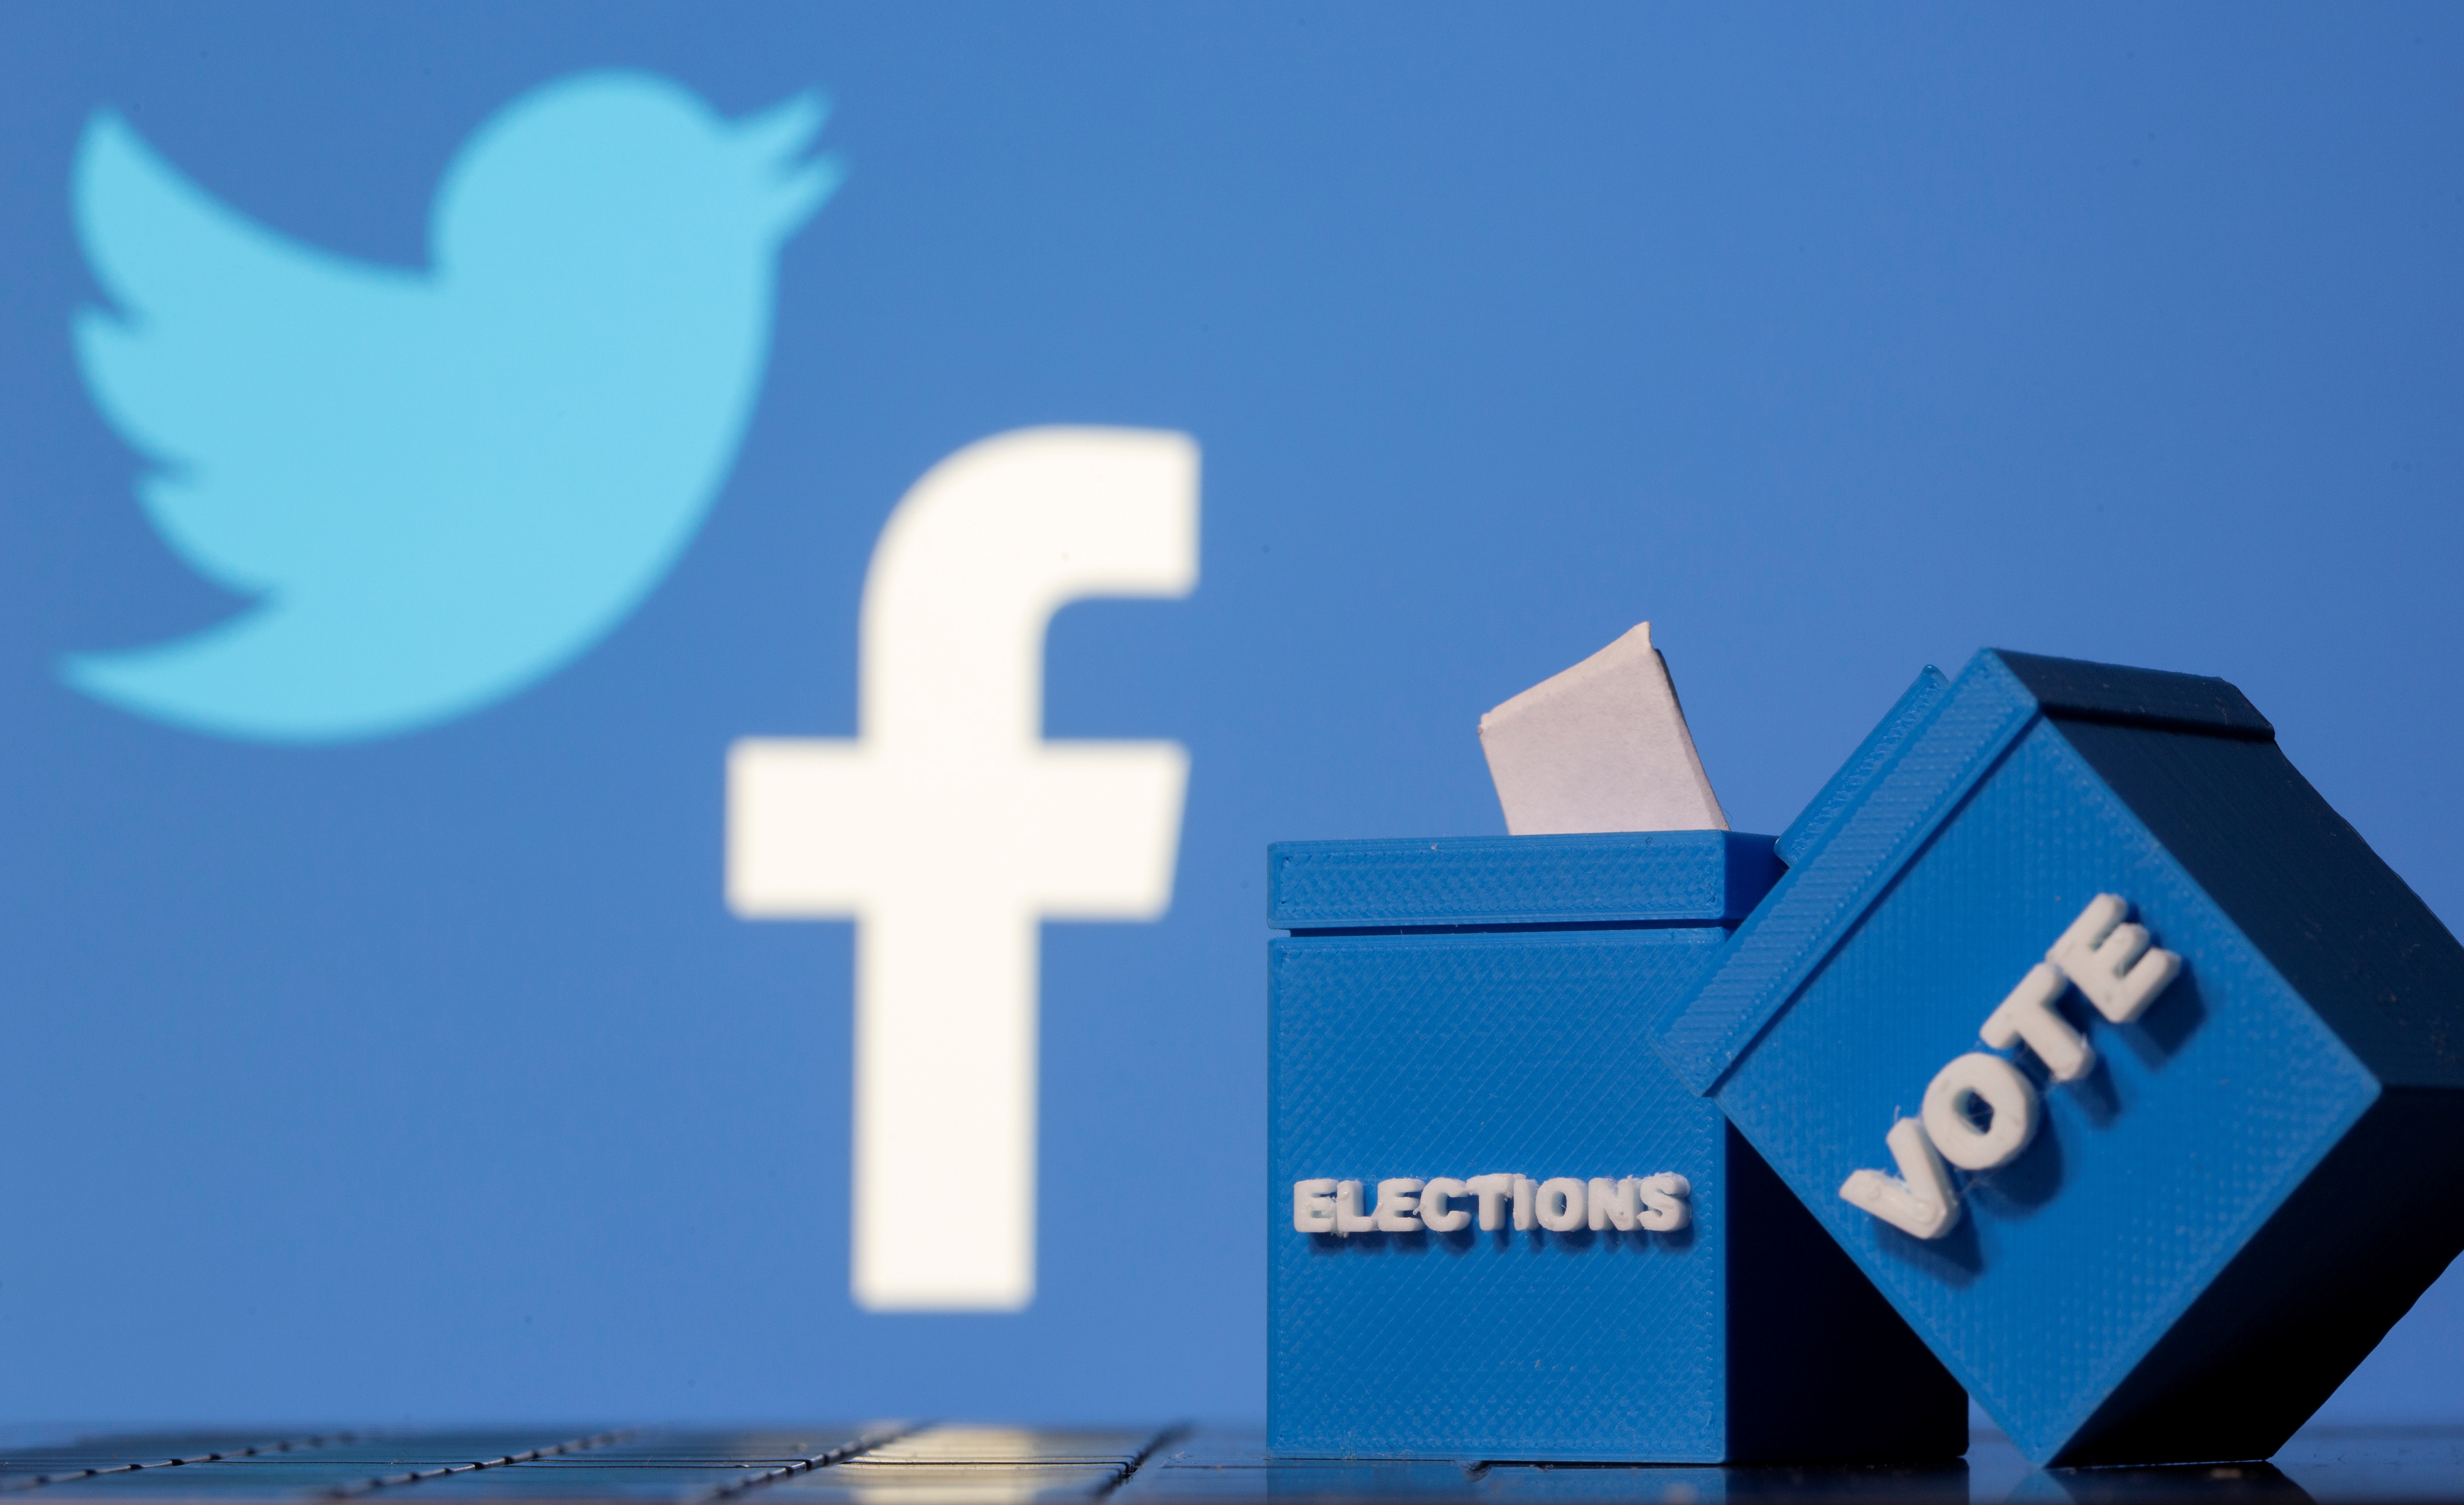 3D-printed ballot boxes are seen in front of Facebook and Twitter logos